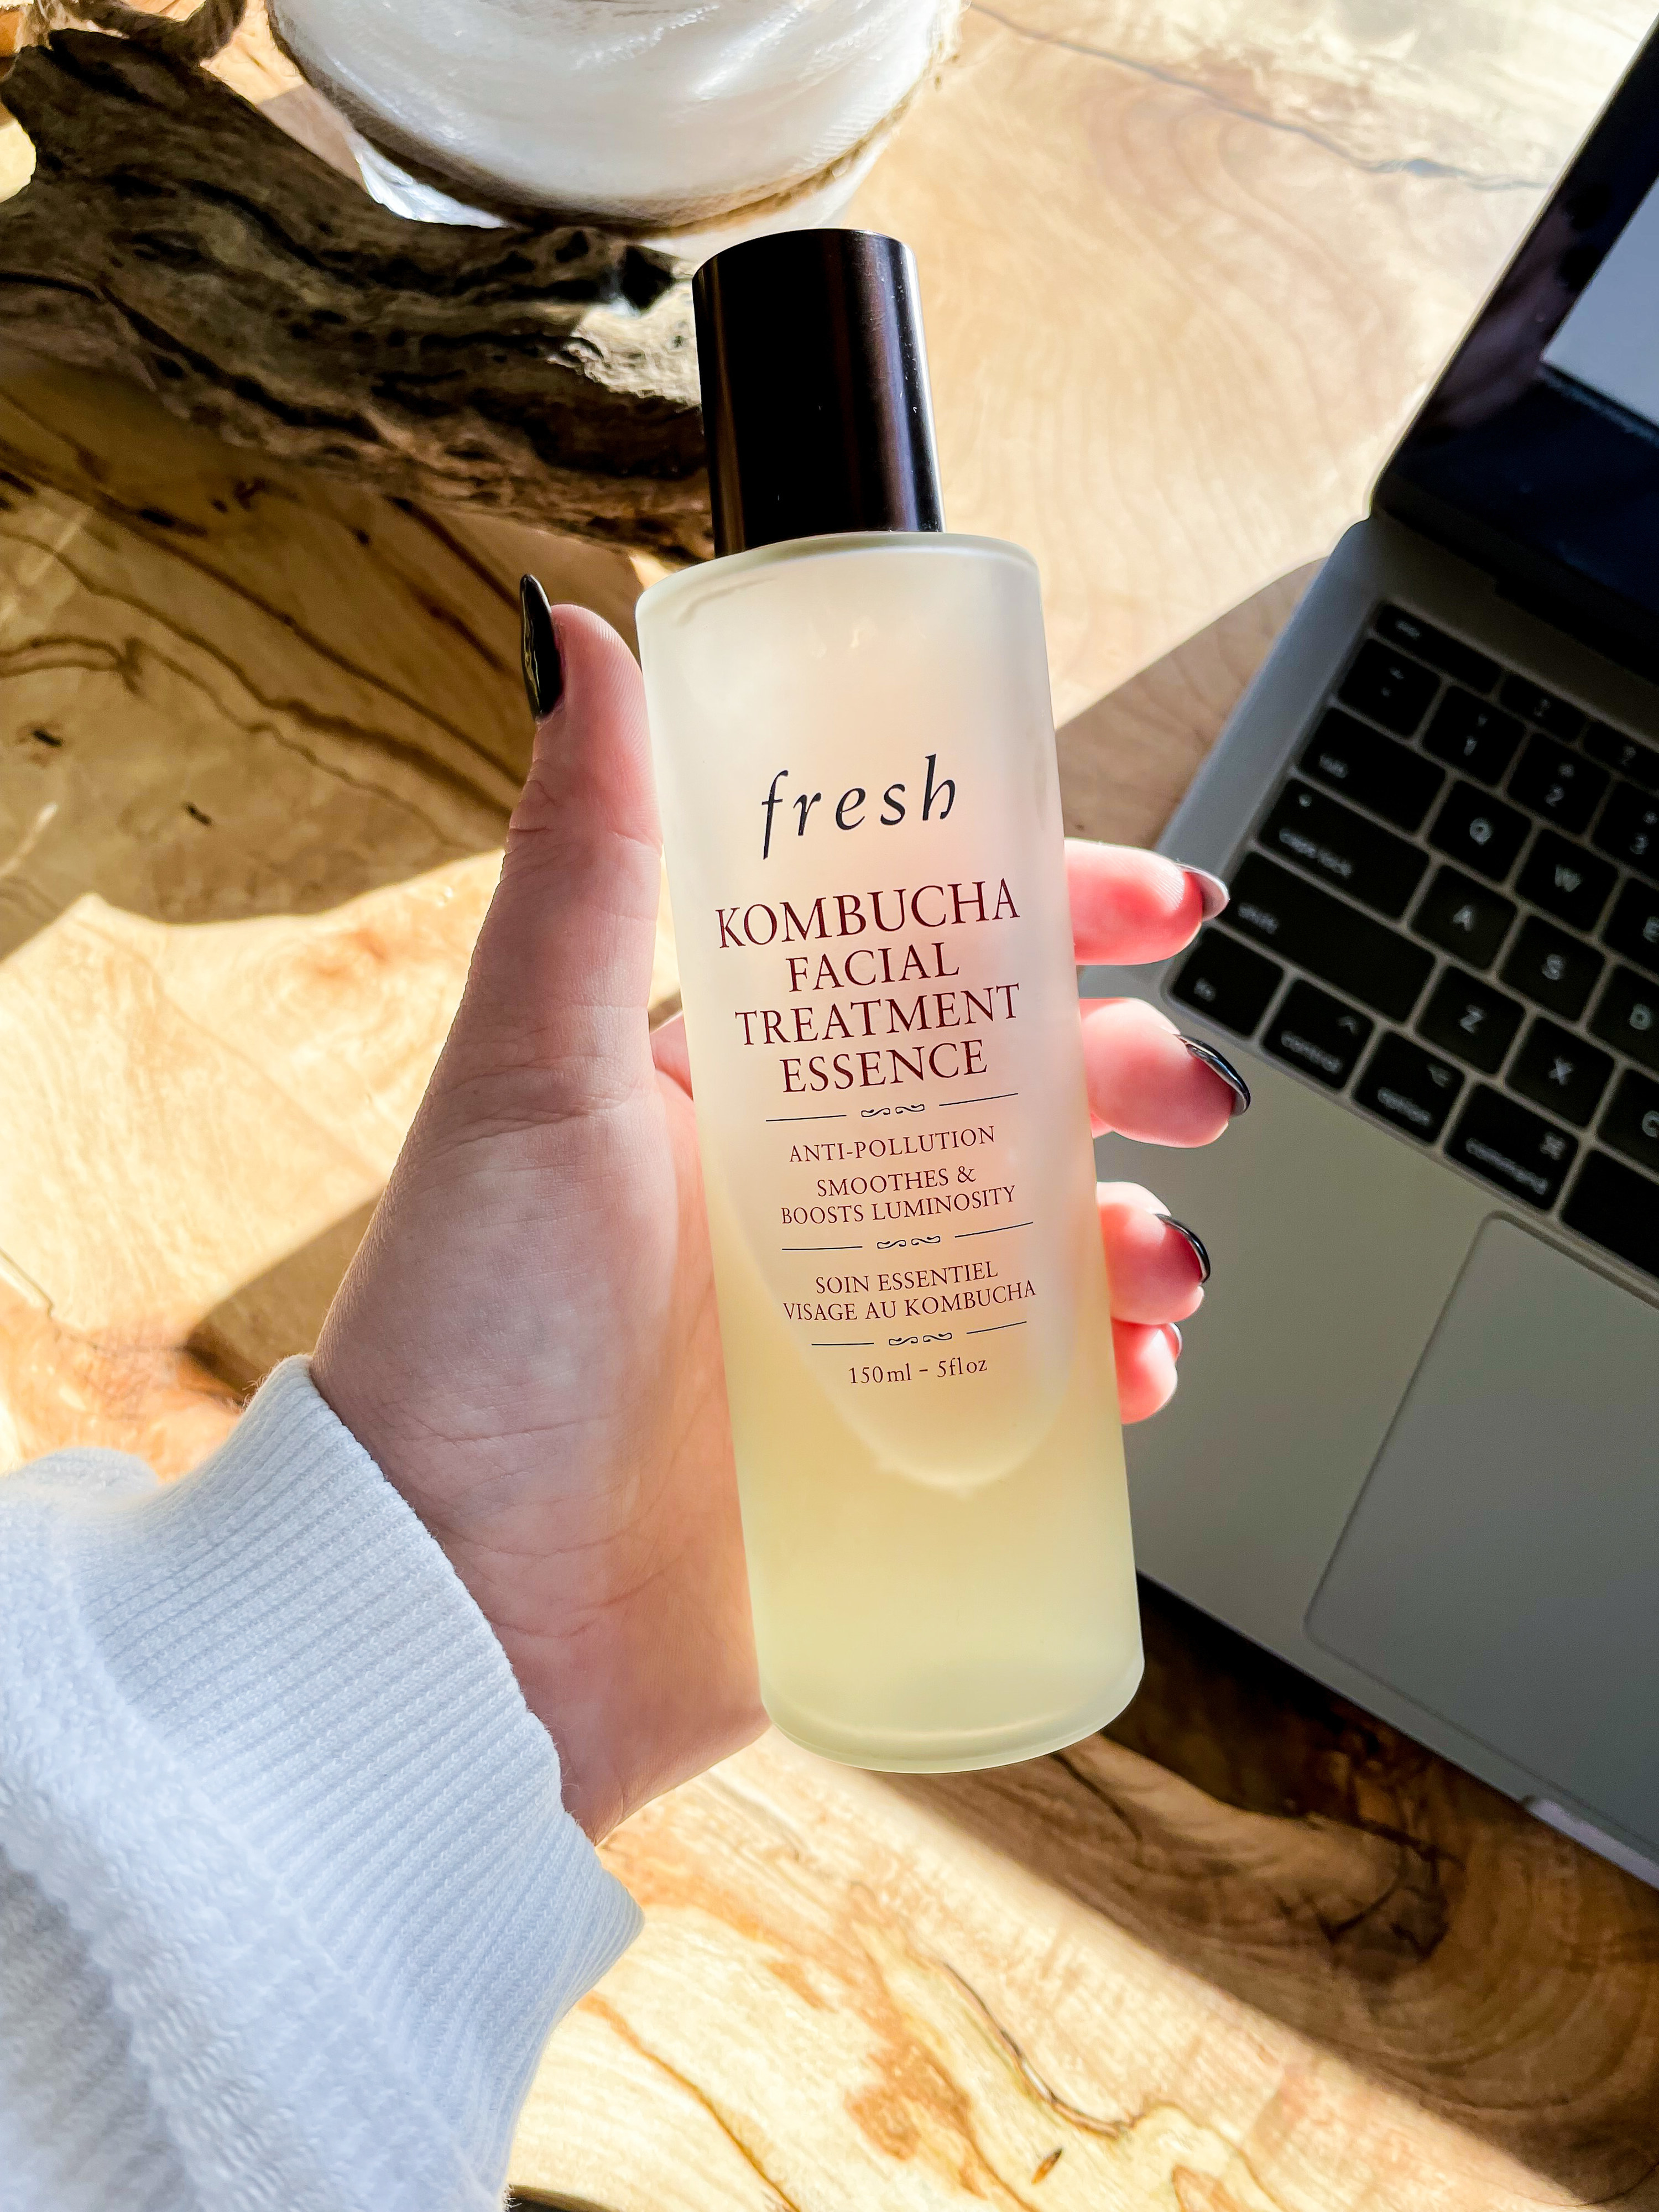 A person holding up a bottle of the face essence against a tabletop and laptop